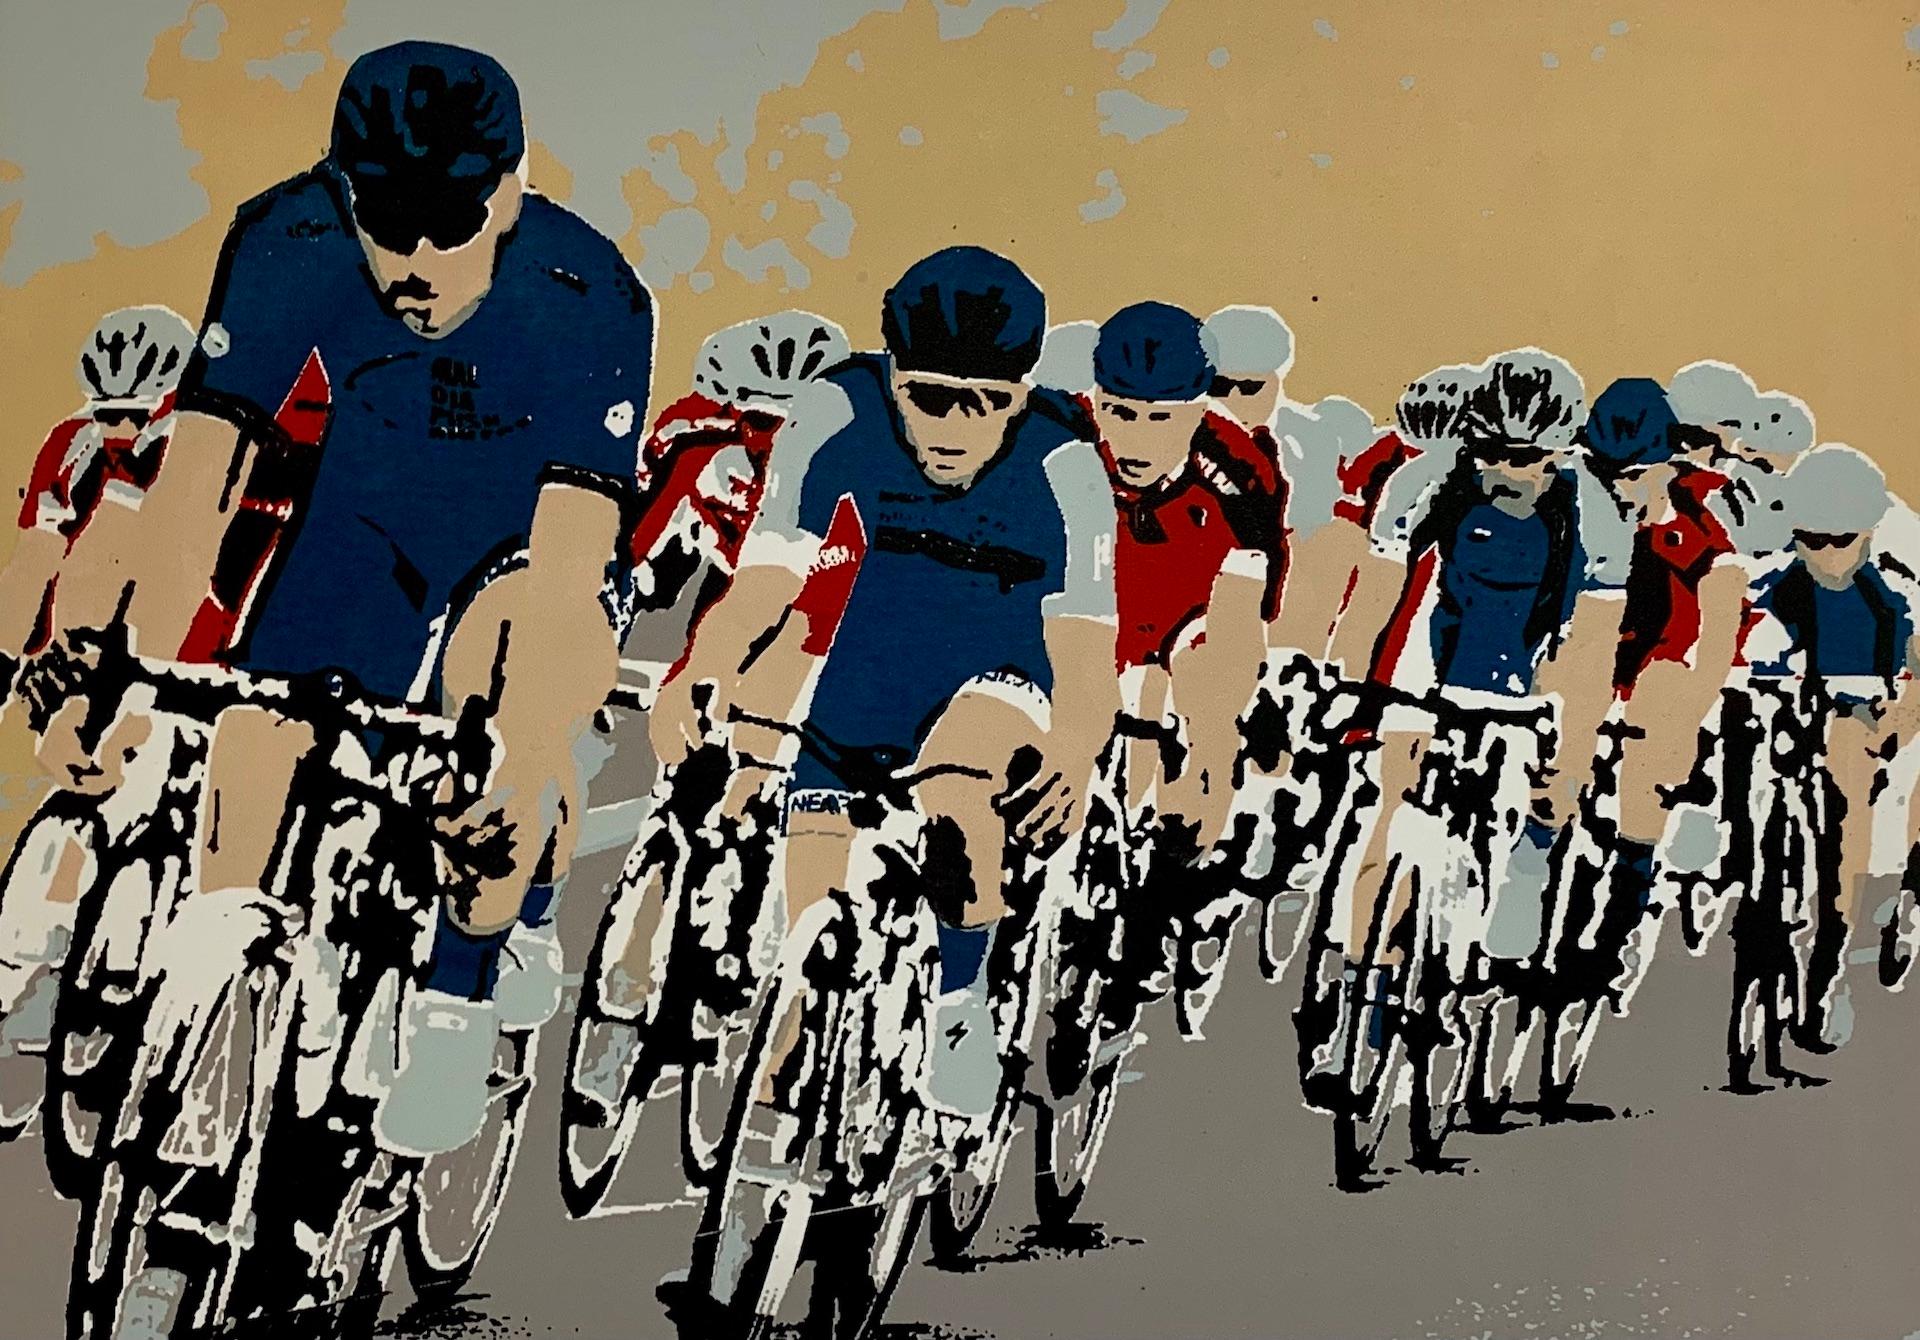 robyn forbes Figurative Print - Peloton, Robyn Forbes, Limited Edition, Cycling Print, Athletics Sport Artwork